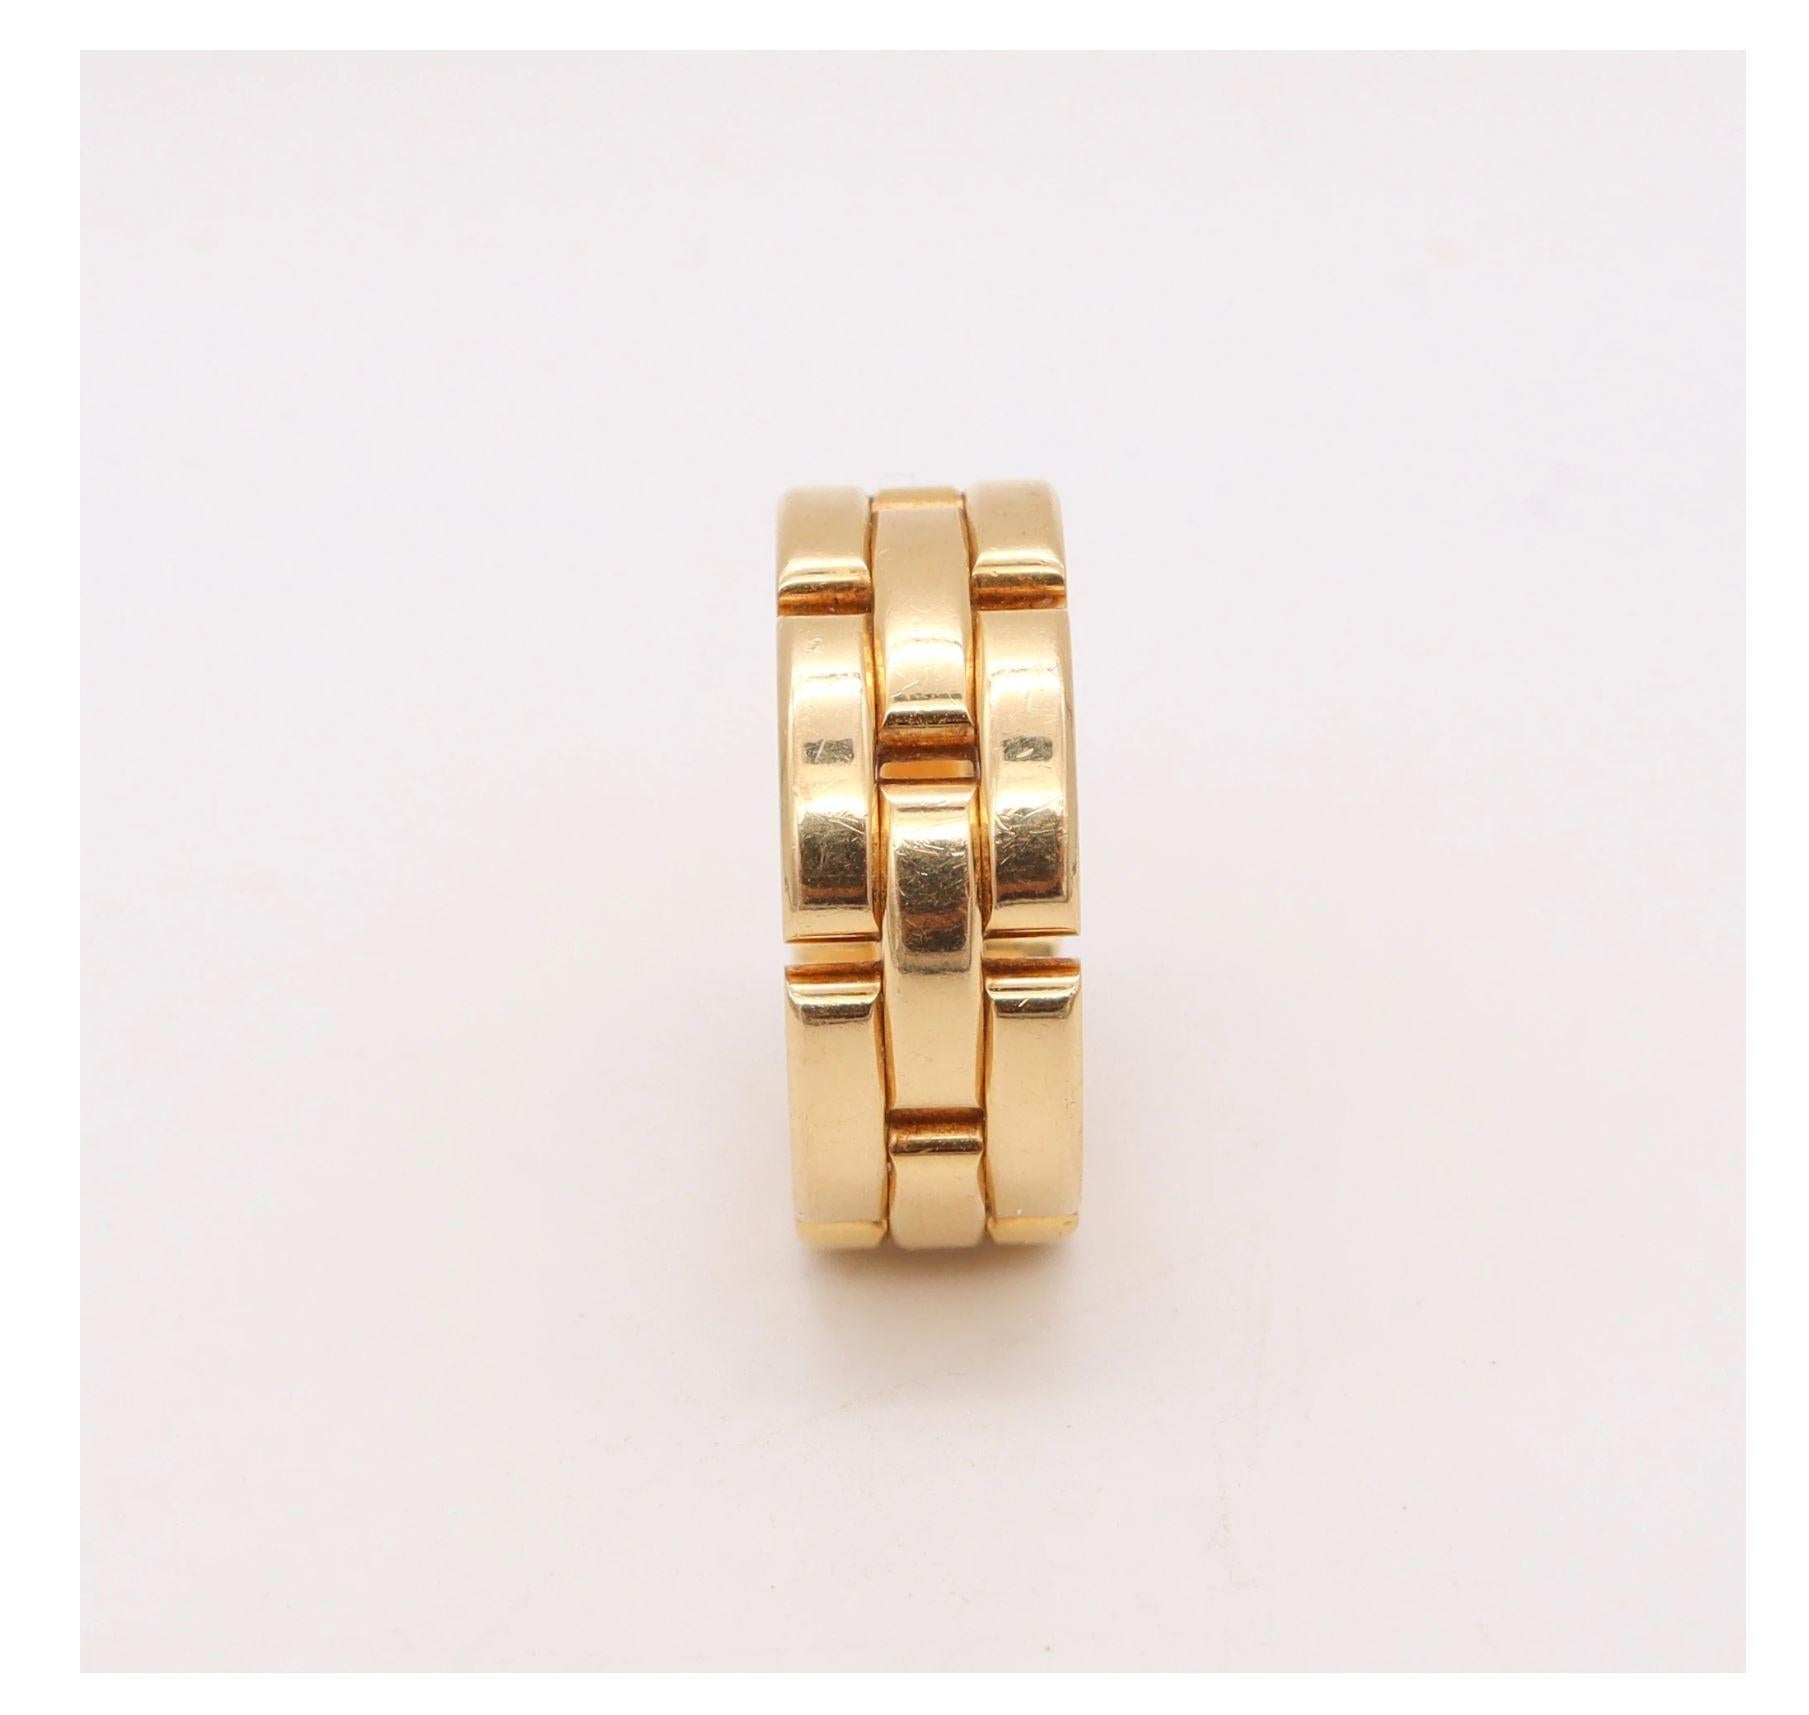 Maillon Panthere ring designed by Cartier.

Beautiful and iconic piece created in Paris, France by the house of Cartier. This modern Maillon Panthere ring has been crafted in solid yellow gold of 18 karats, with very high polished surfaces.

Has a